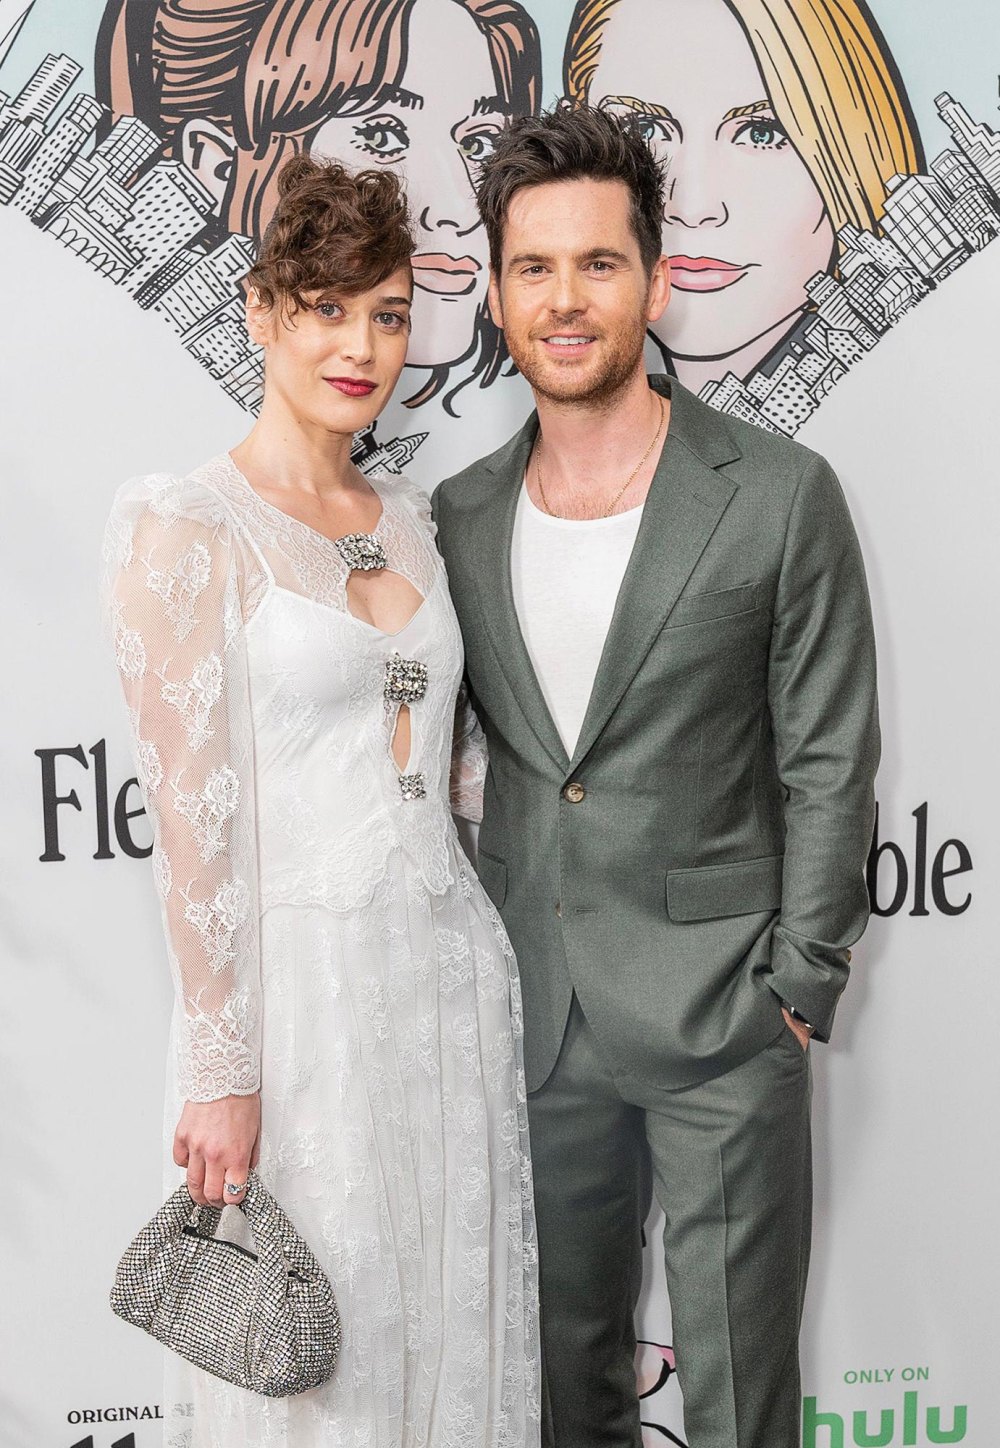 Lizzy Caplan and Tom Riley s Relationship Timeline- Inside Their Low-Key Romance-179 Lizzy Caplan wearing dress by Christopher Kane and Tom Riley attend Hulu FX's Fleishman Is In Trouble at Carnegie Hall FX's 'Fleishman In Trouble' TV show premiere